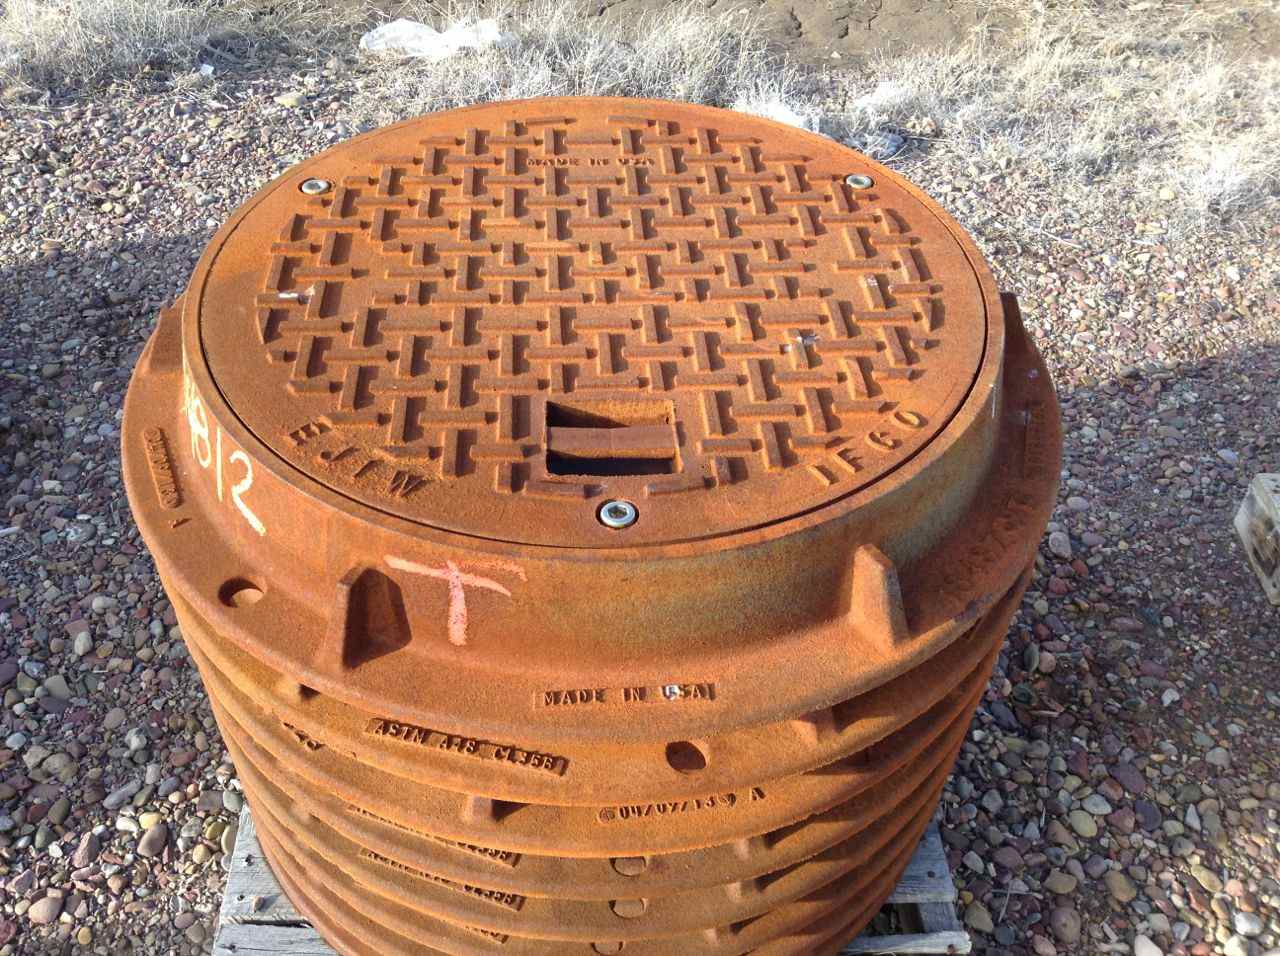 How Heavy is a Manhole Cover? 